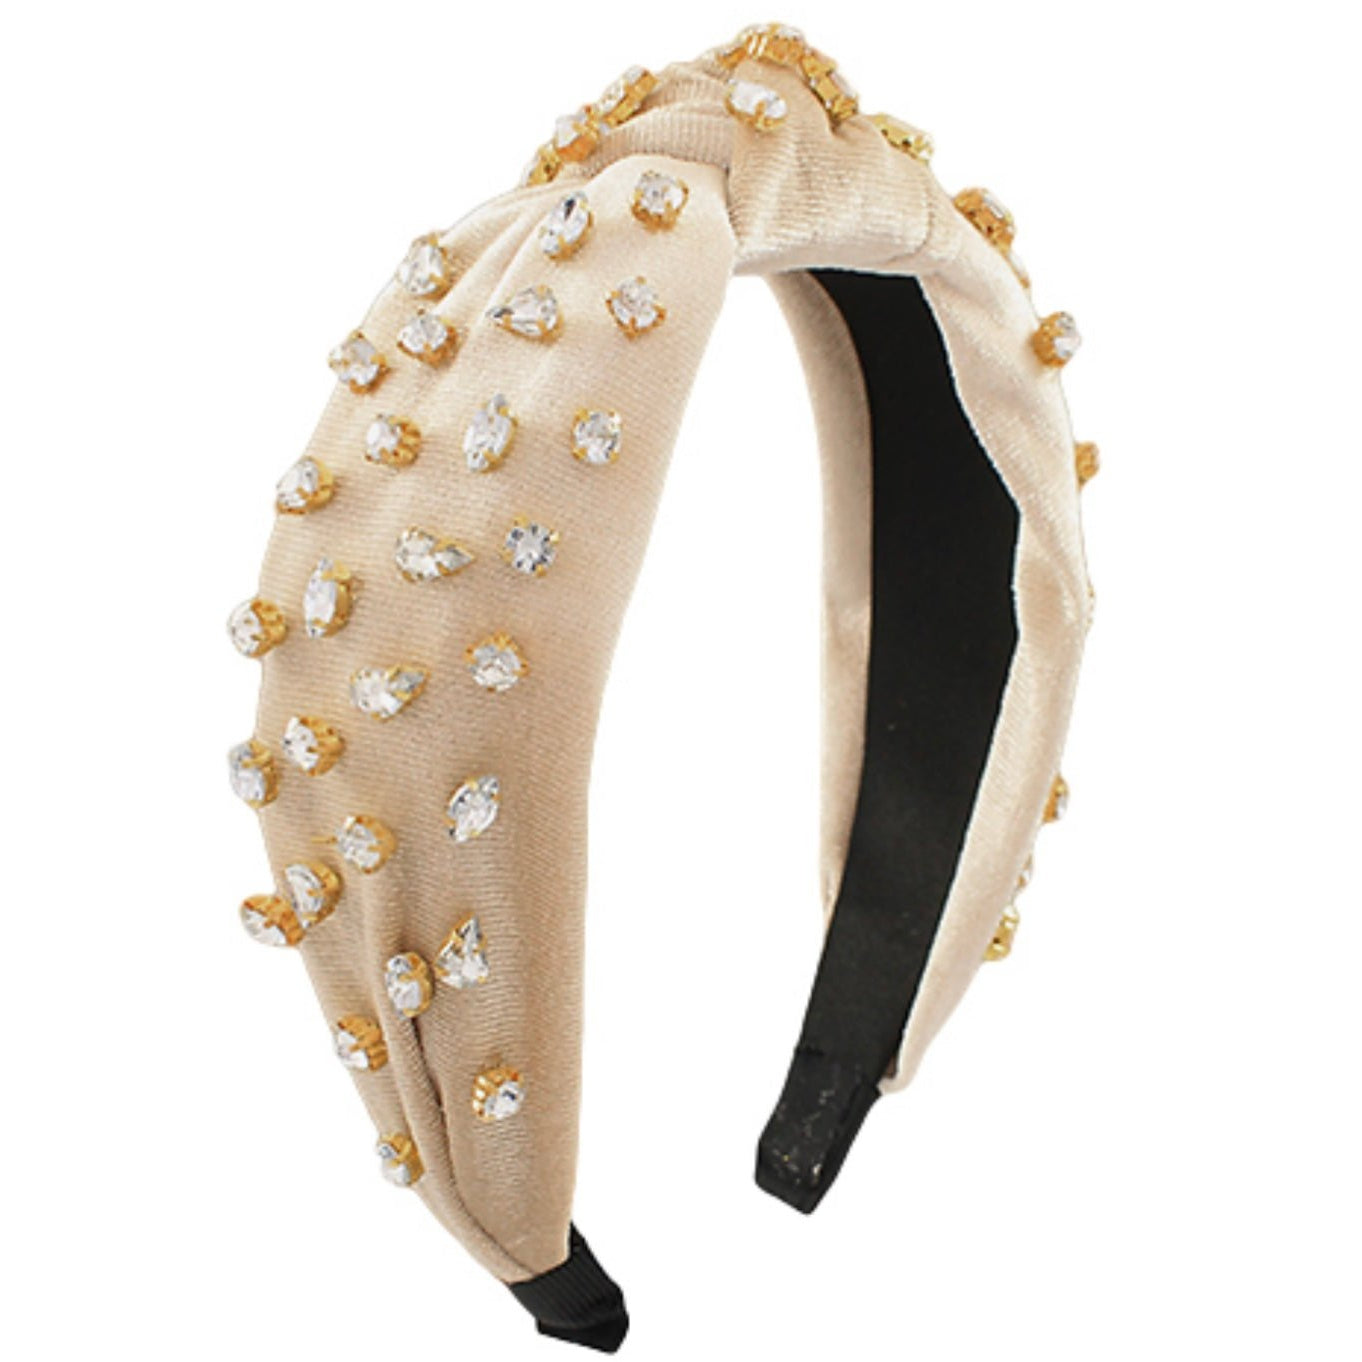 Jeweled Velvet Knotted Headband - 5 Colors Available